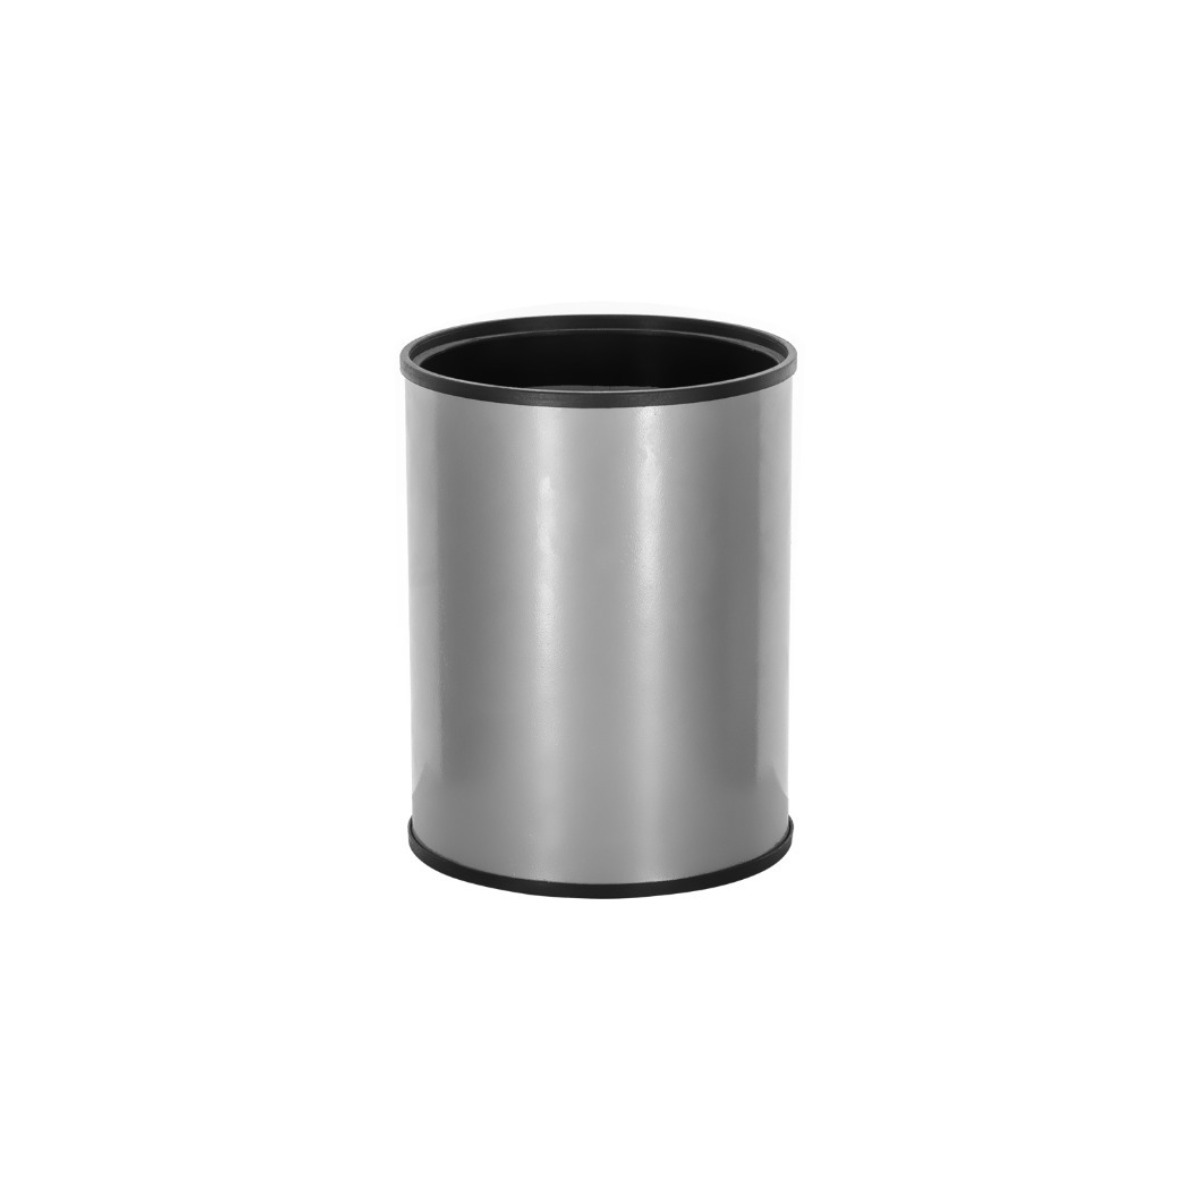 AB-206 Classic Trash Can product logo